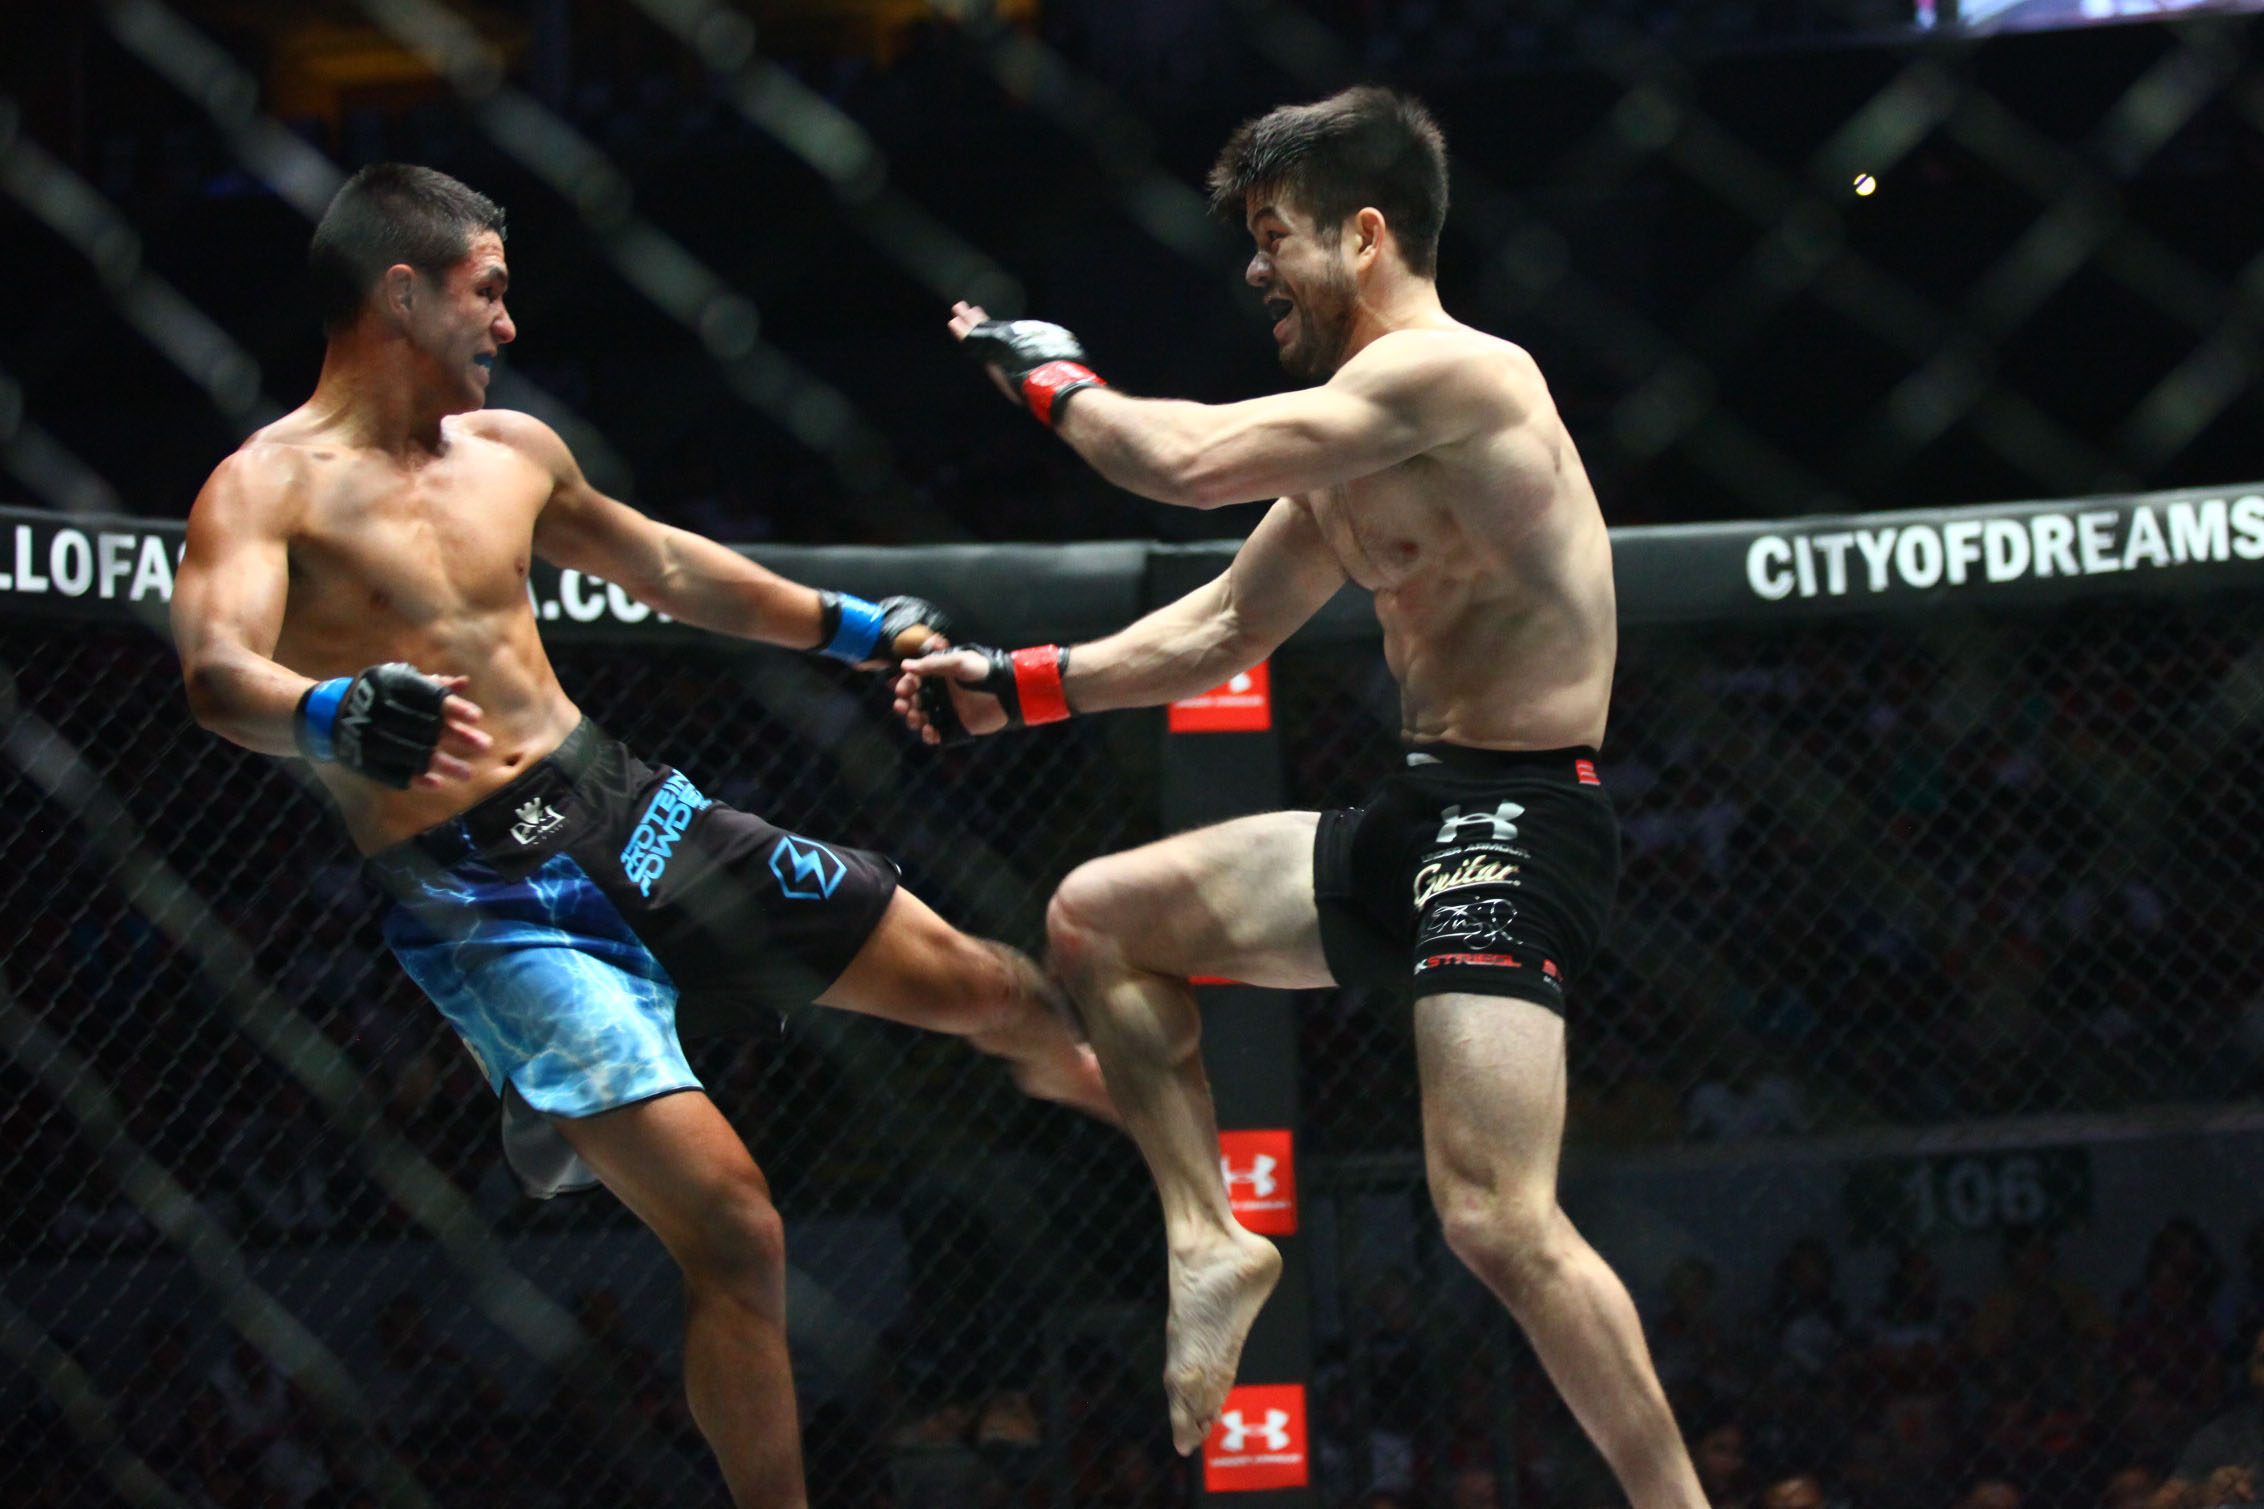 ONE FC fighter Mark Striegl promises to bounce back from submission loss